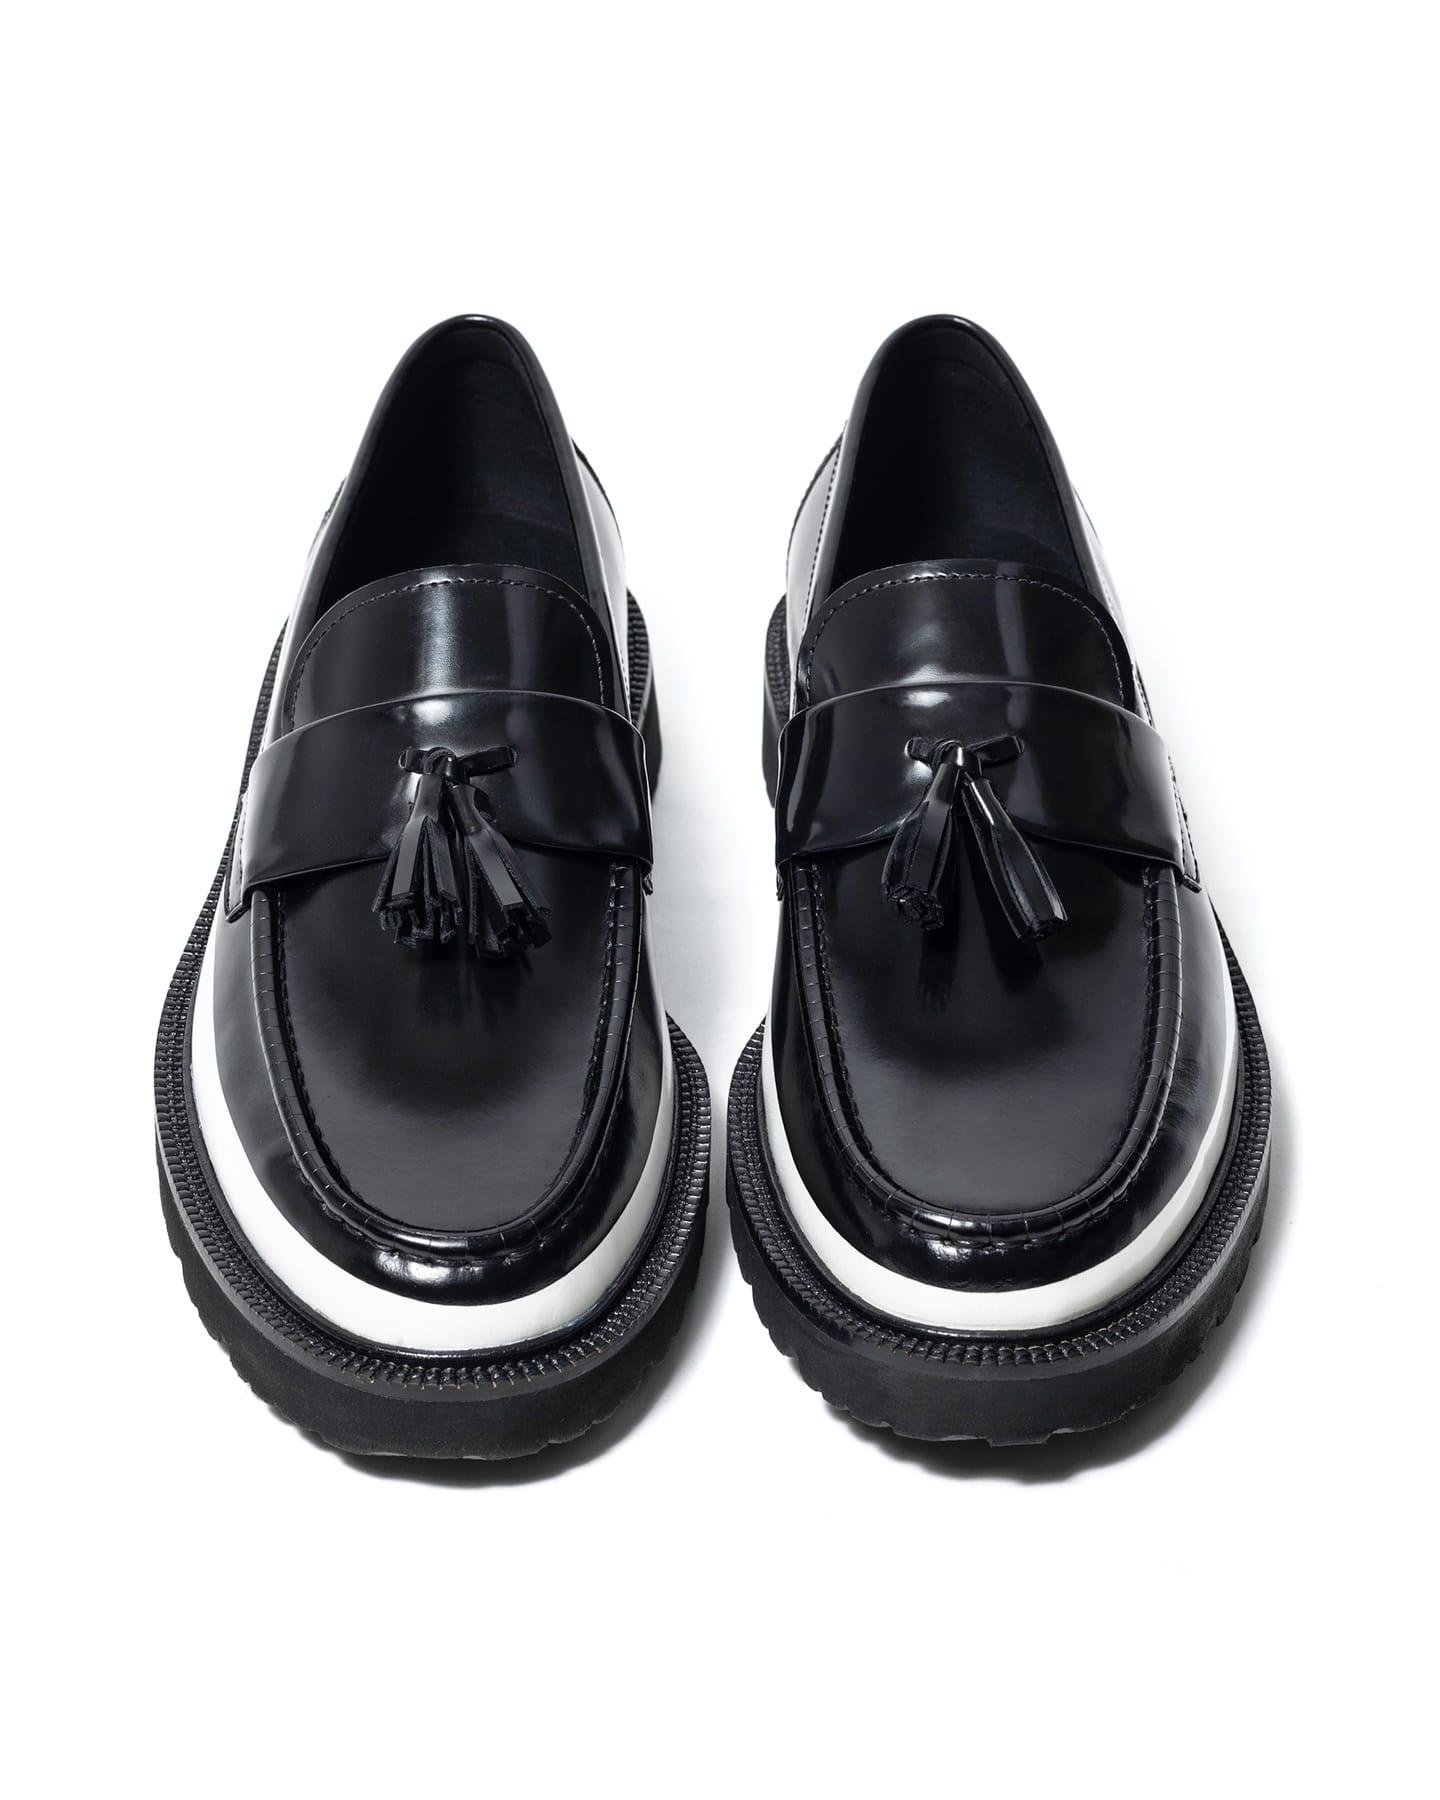 Fragment COLE HAAN Classics Loaferメンズ